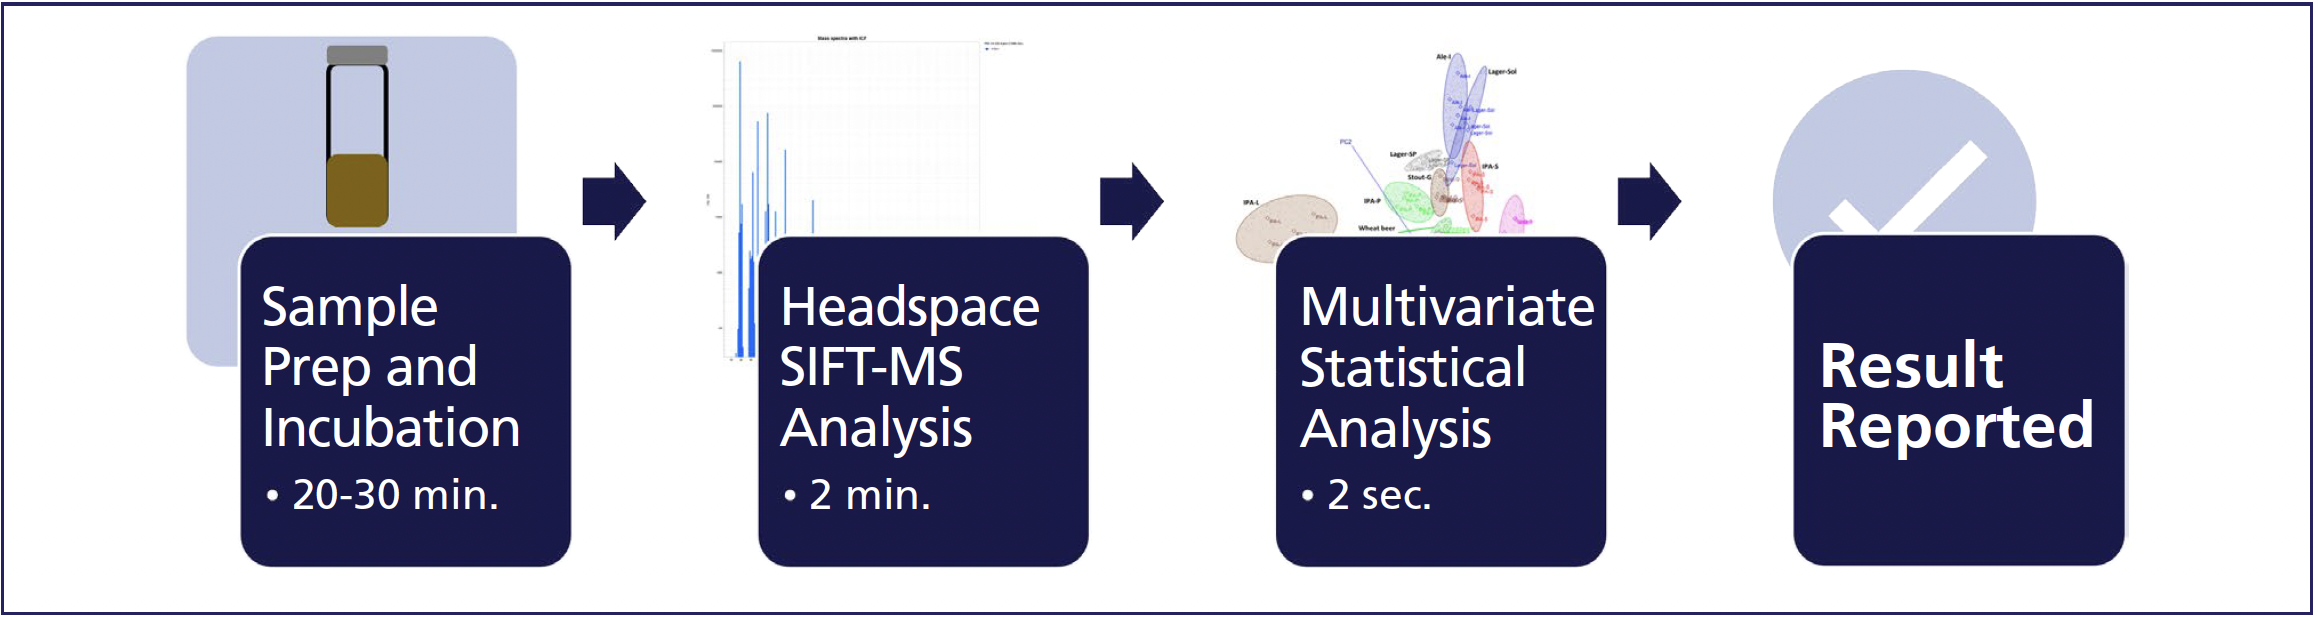 FIGURE 2: Schematic illustration of the analytical workflow for routine untargeted, automated headspace-SIFT-MS analysis of food products. The autosampler software nests samples, creating workflows that can analyze up to 250 samples a day.